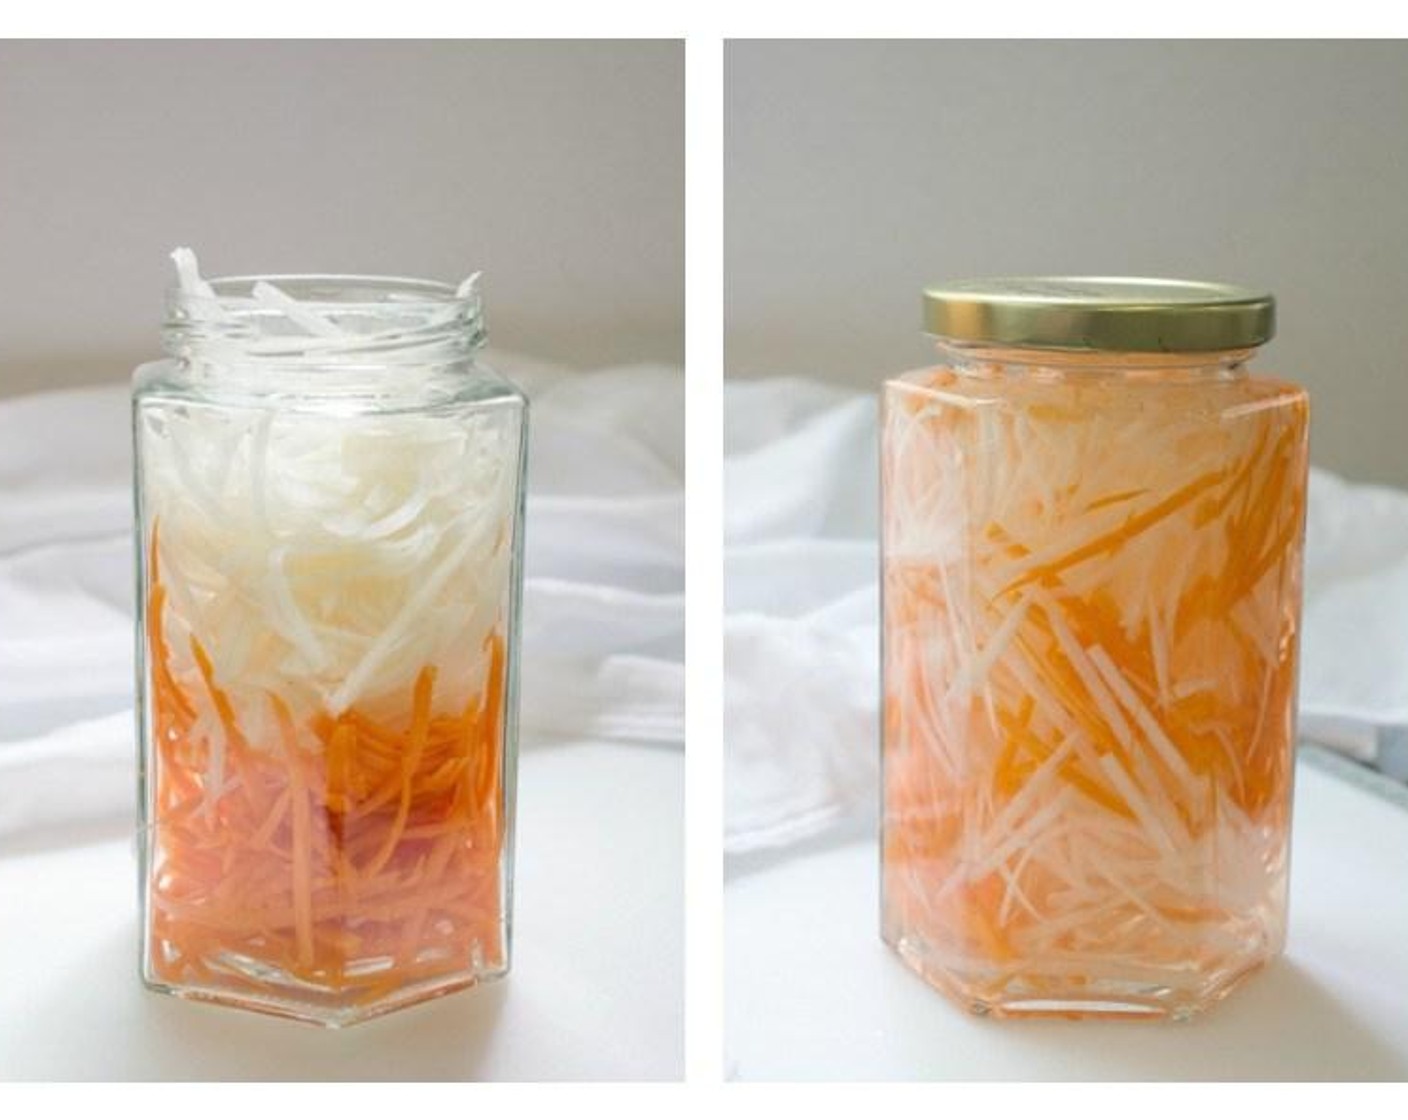 step 1 Put Carrot (1 cup), Daikon Radish (1 cup), Distilled White Vinegar (1 cup), Water (3/4 cup), Granulated Sugar (1/4 cup) into a jar, put the lid on tightly, then shake the jar gently to combine the ingredients. Allow brining in the fridge for at least an hour, or up to 1 month.